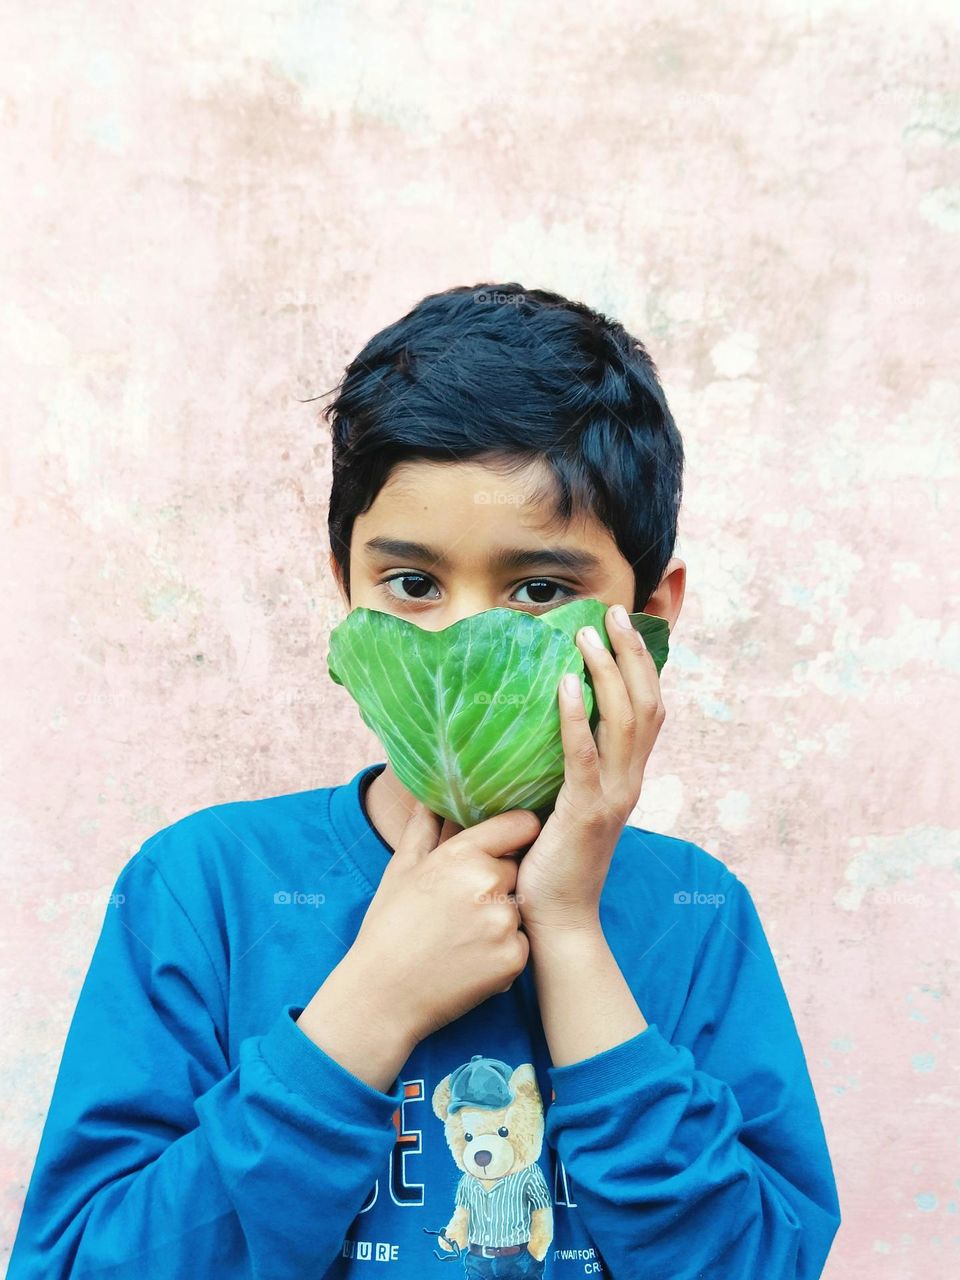 kid using mask made-up of cabbage leaf due to air pollution.